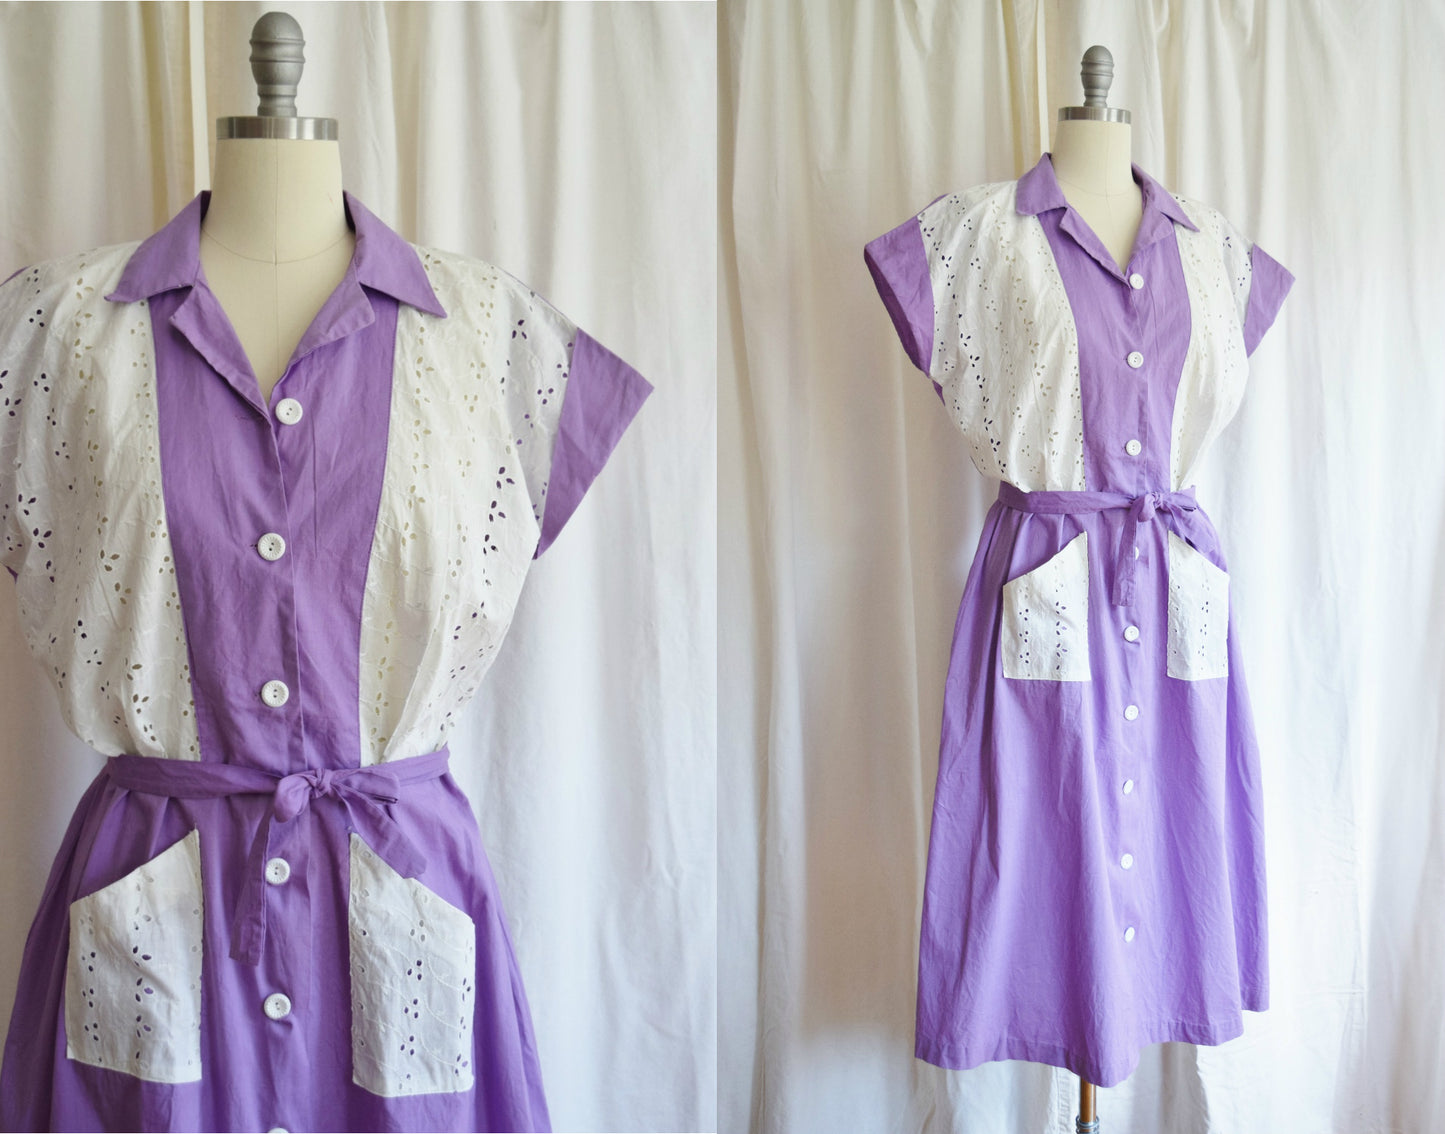 Early 1950s Purple and Eyelet Day Dress | Approx. L/XL